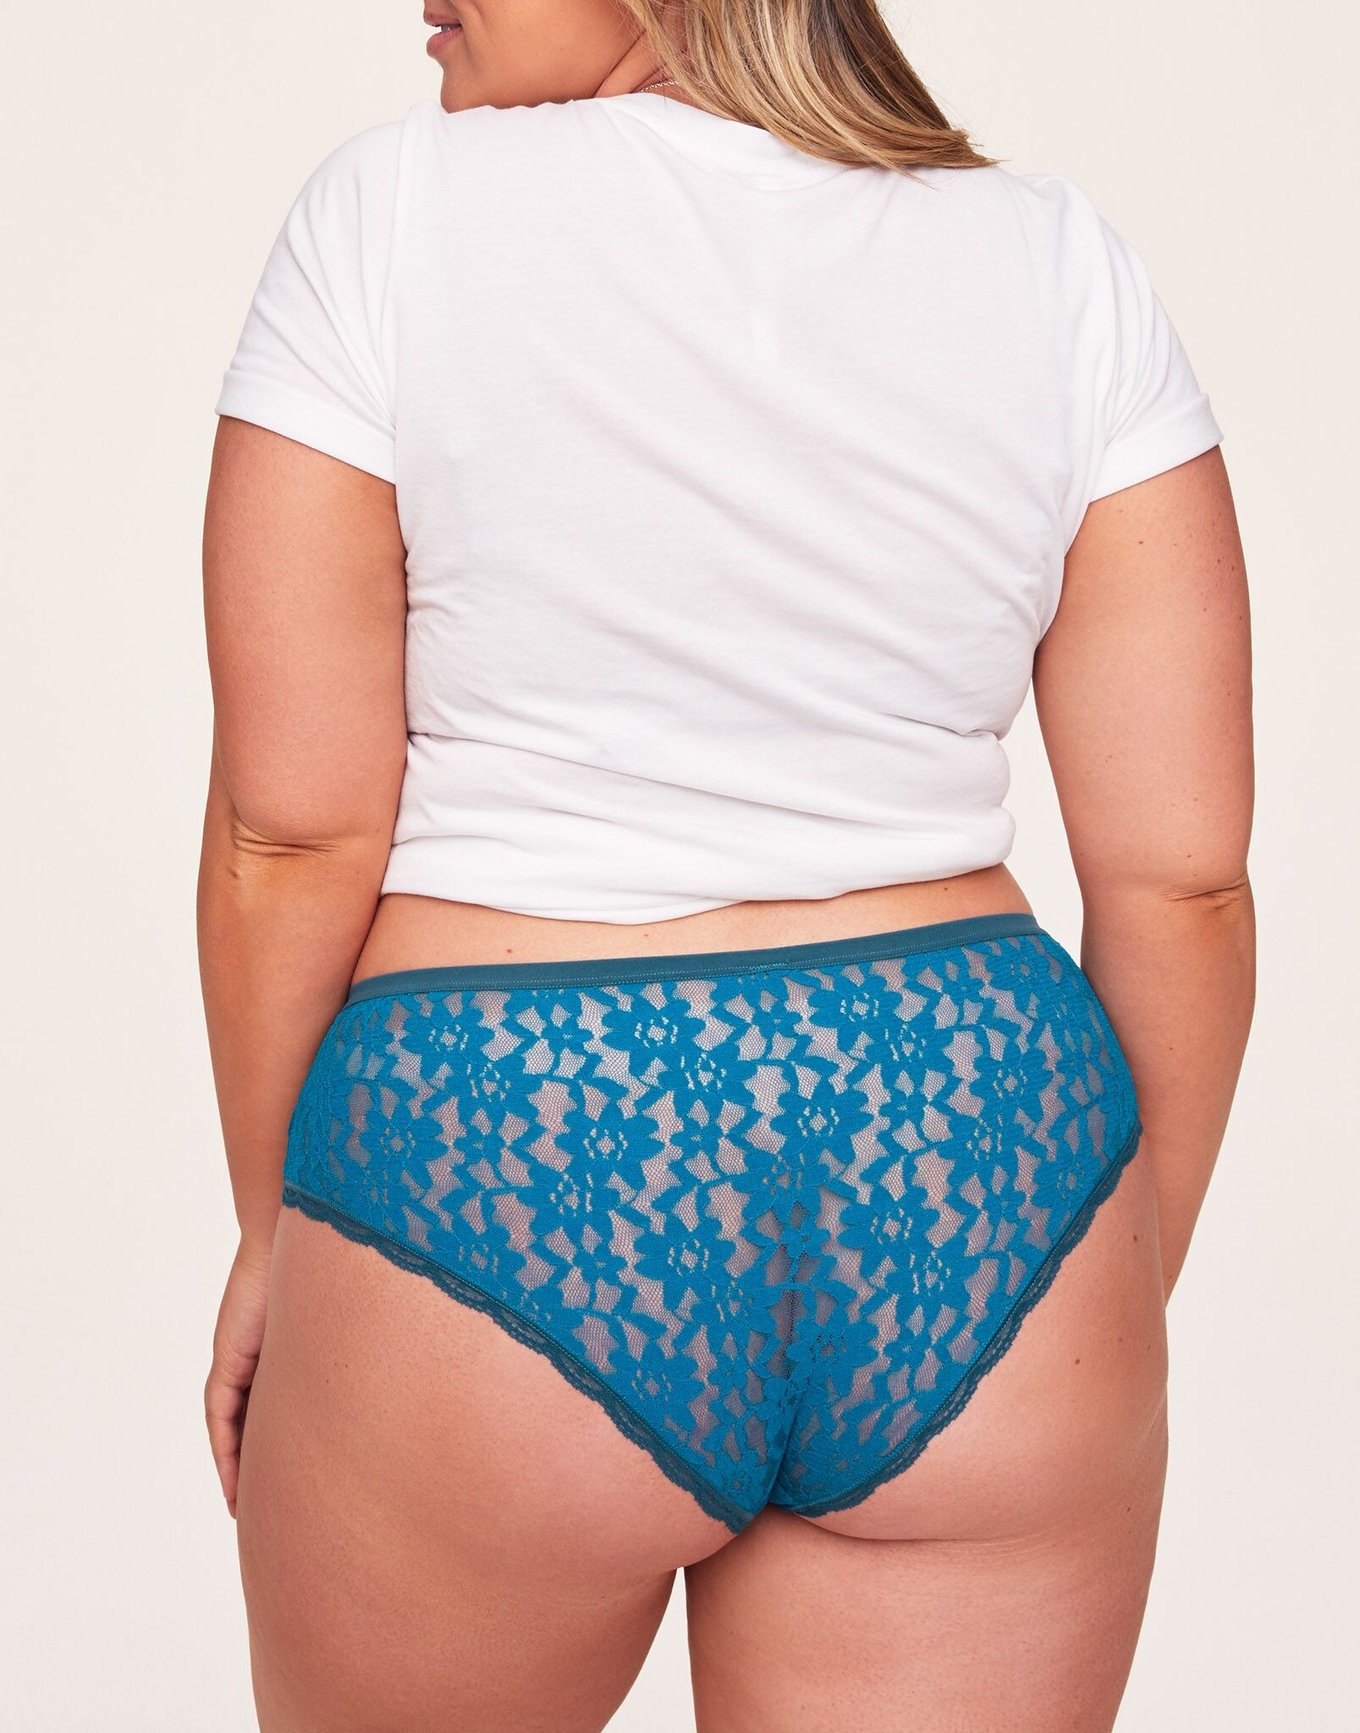 Contrast Lace Cheeky Panty